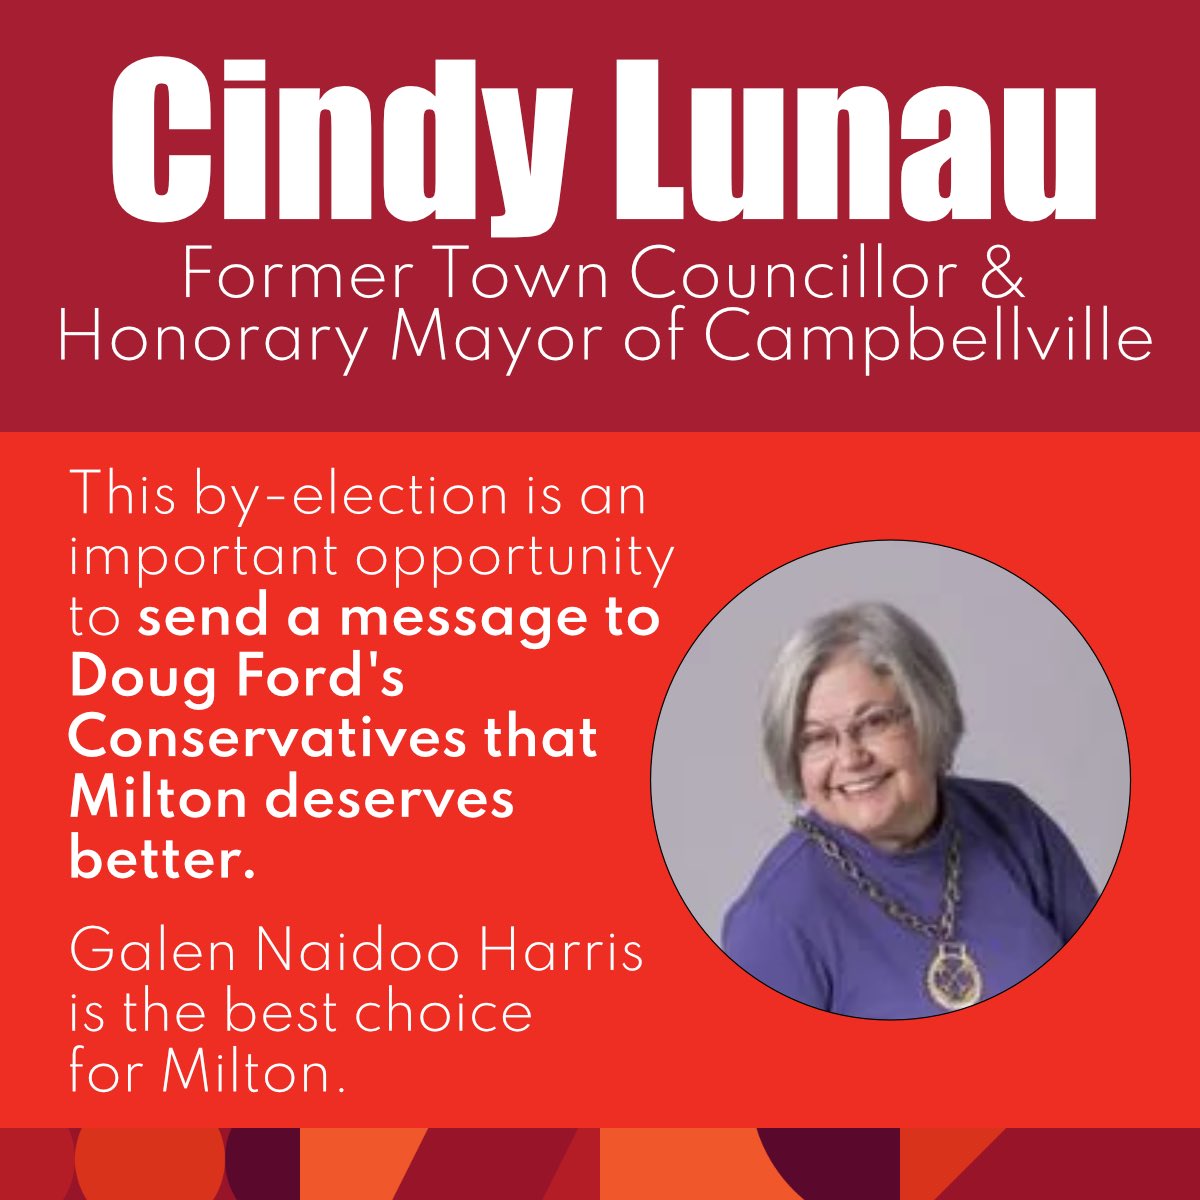 Thank you for your support, Cindy! “This by-election is an important opportunity to send a message to Doug Ford’s Conservatives that Milton deserves better. Galen Naidoo Harris is the best choice for Milton.”